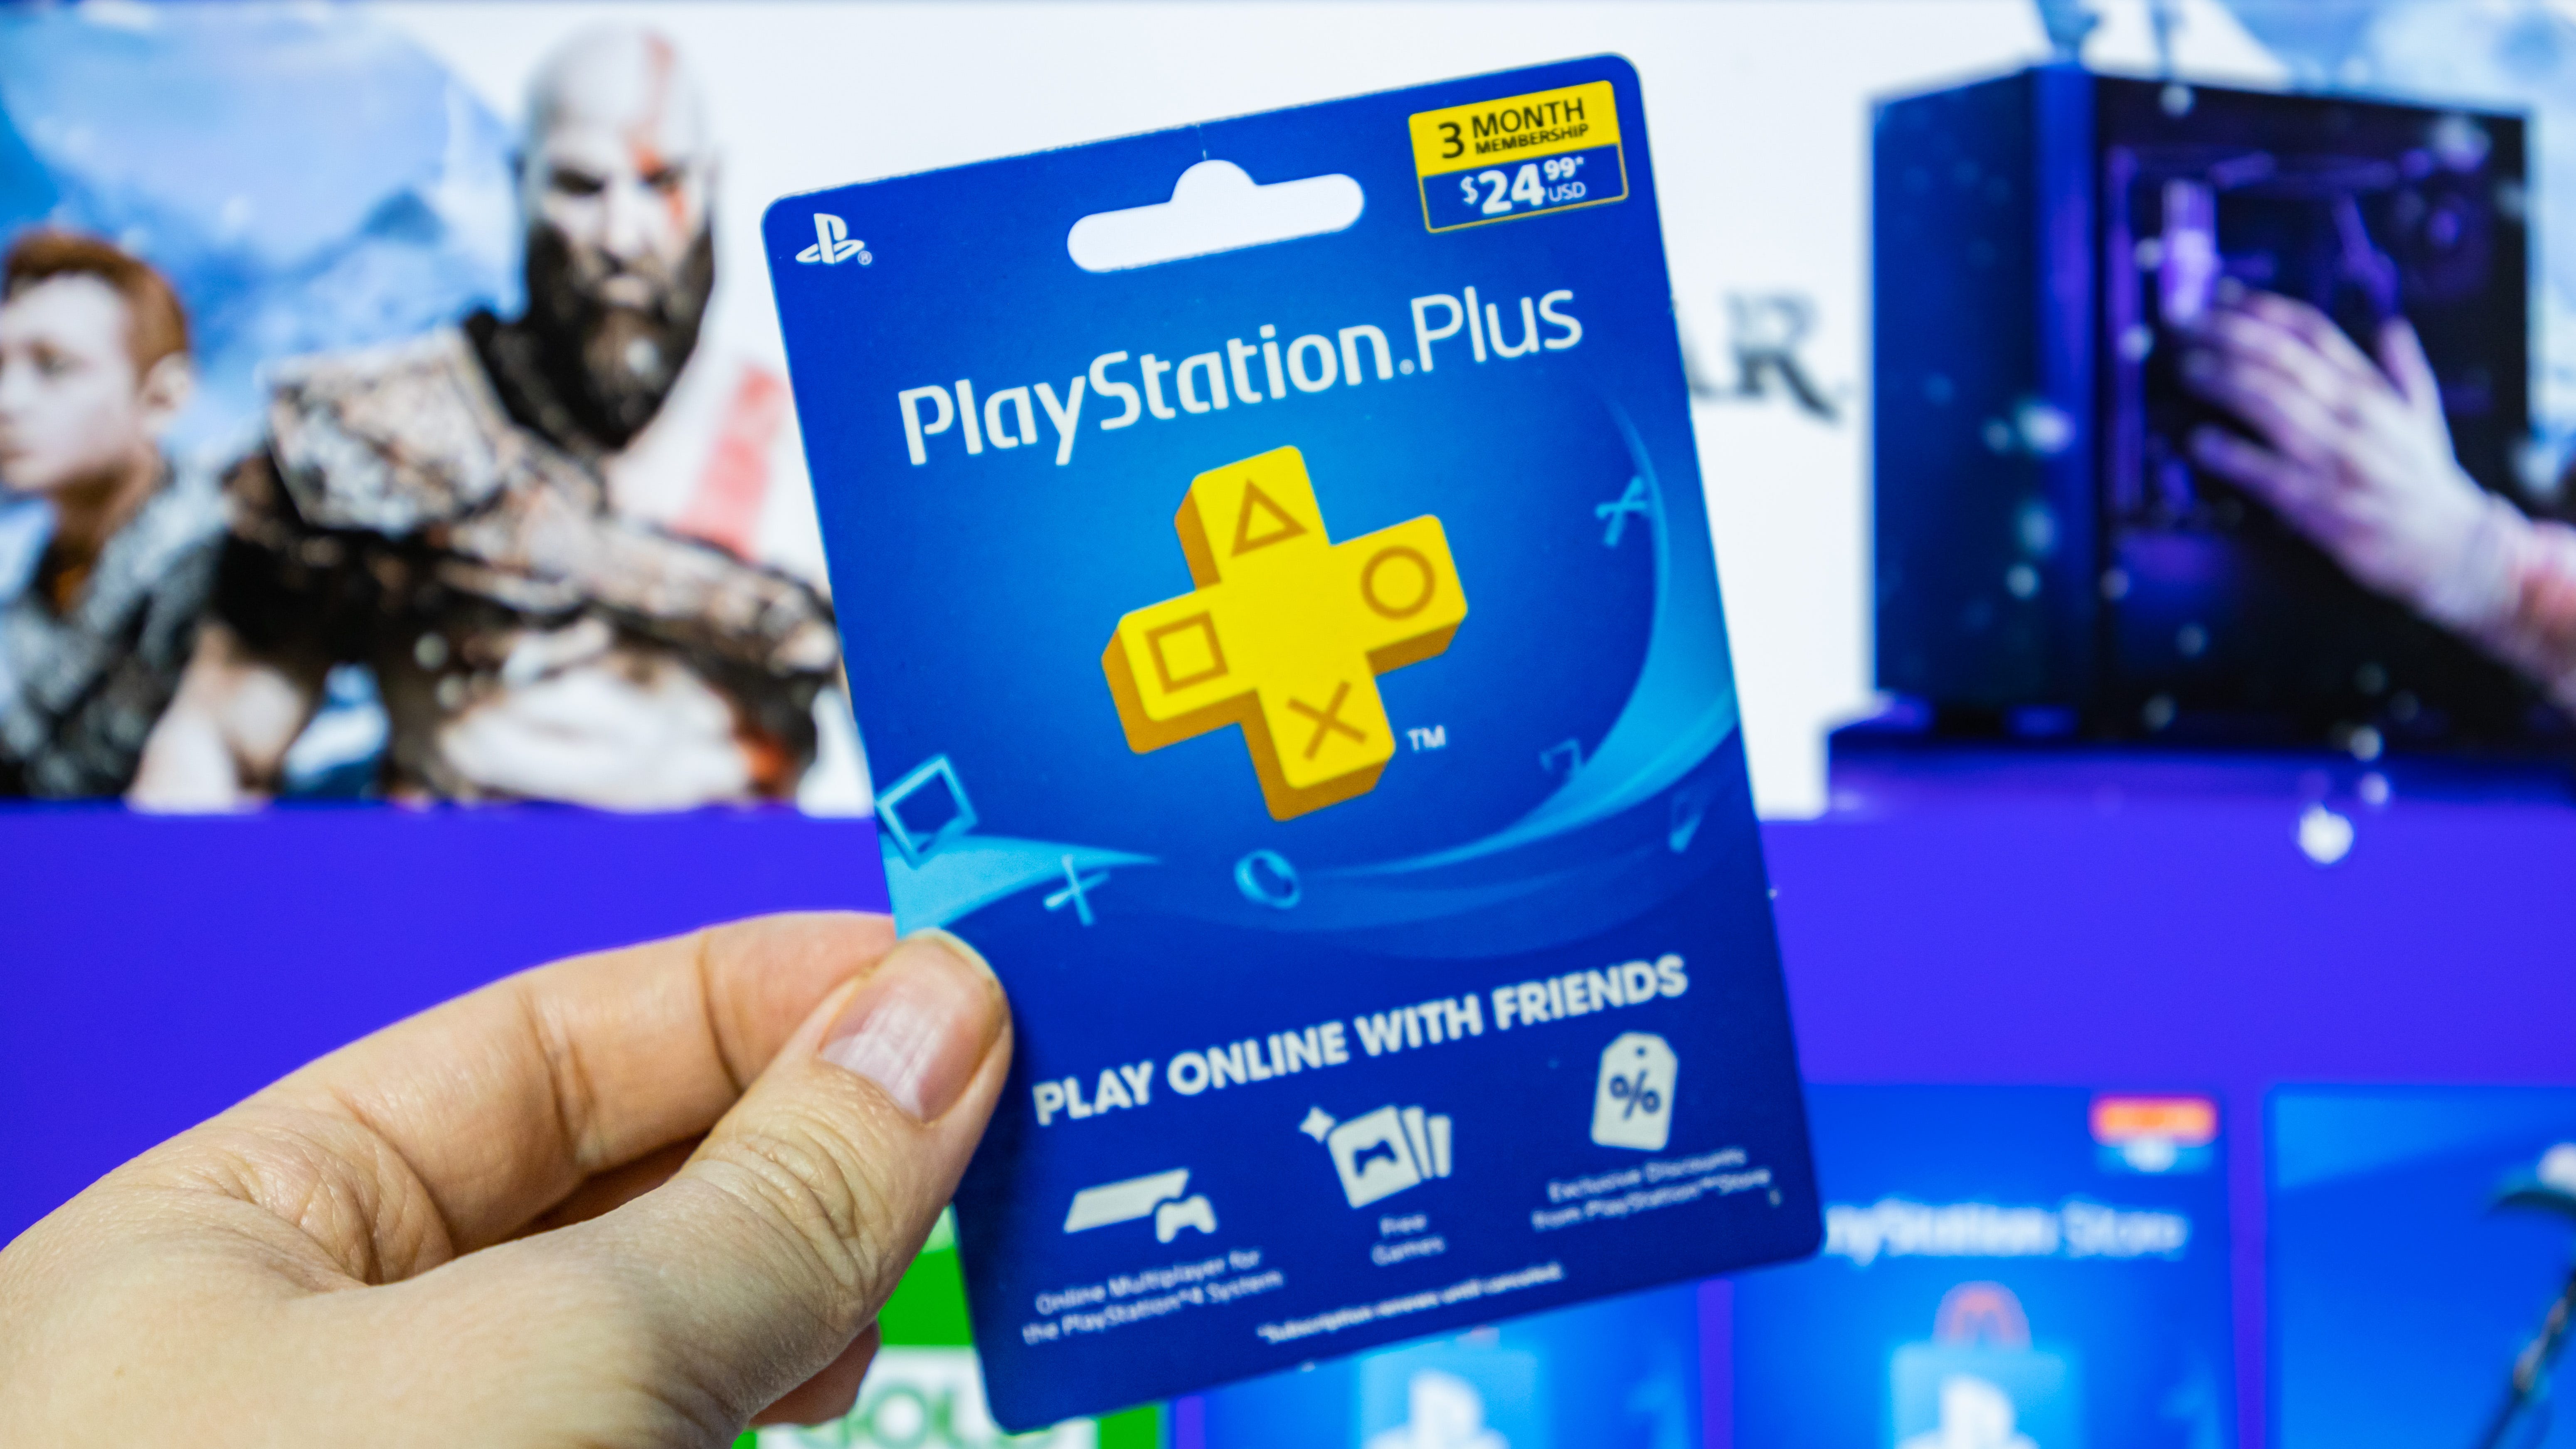 PlayStation on X: Your PlayStation Plus Monthly Games for March